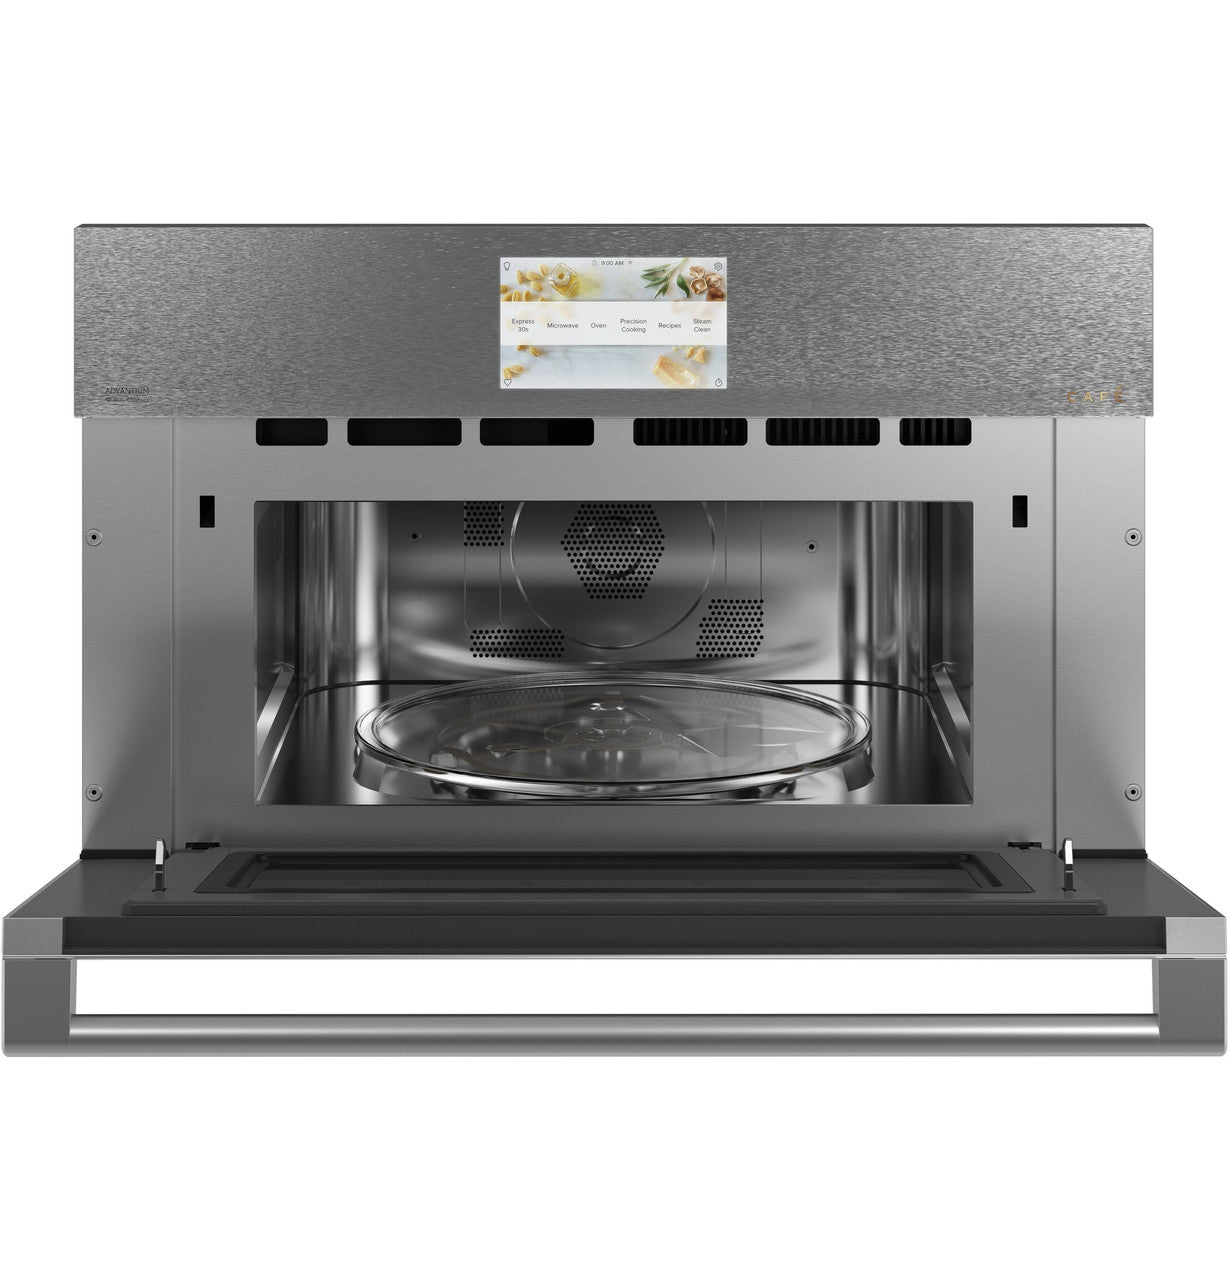 Café - 1.7 cu. ft Single Wall Oven in Platinum Glass - CSB913M2NS5